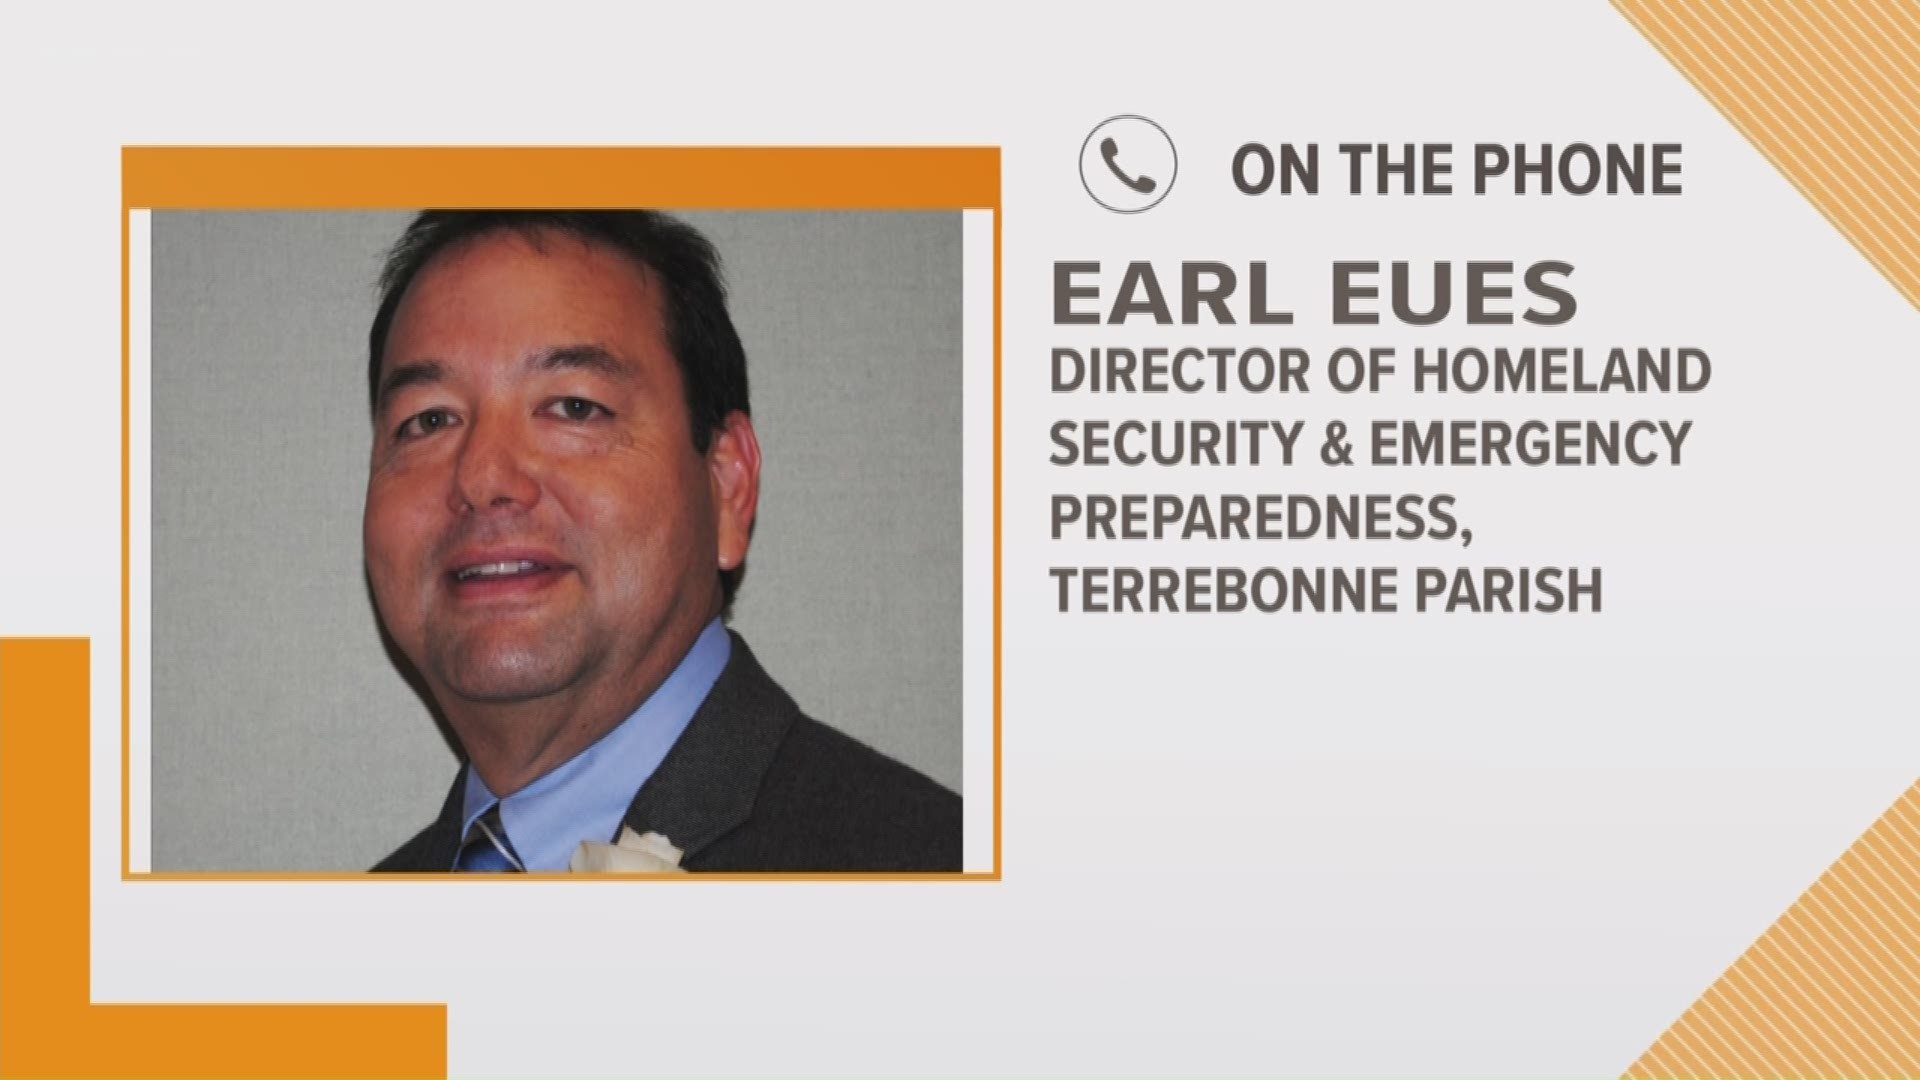 Terrebonne Parish Director of Homeland Security and Emergency Preparedness Earl Eues says the parish could still see tropical storm force winds